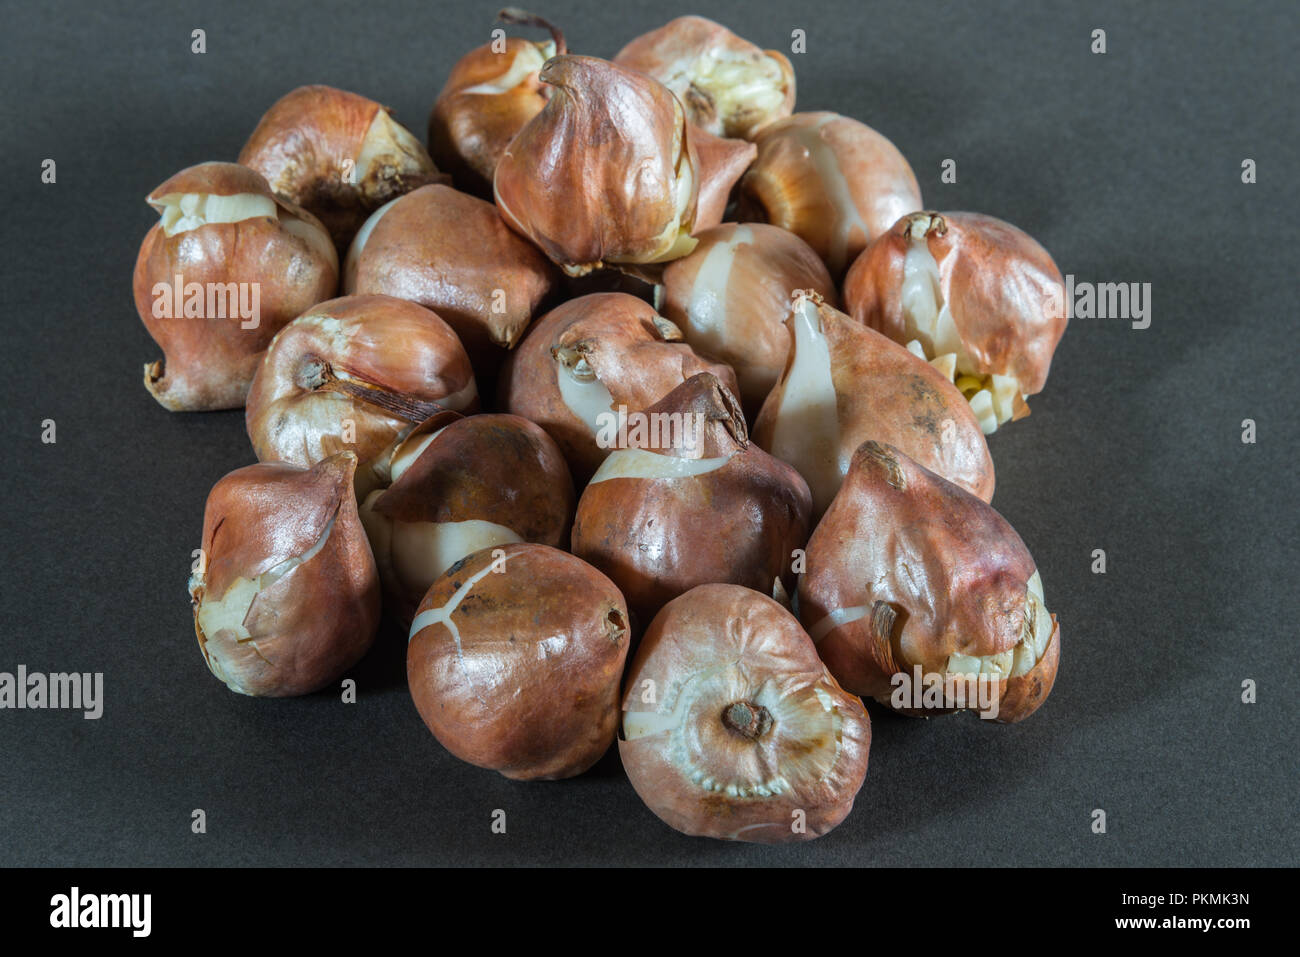 Close up of a group of dry bulbs of the spring flowering garden tulip bulbs against a plain grey background inside before planting. Stock Photo